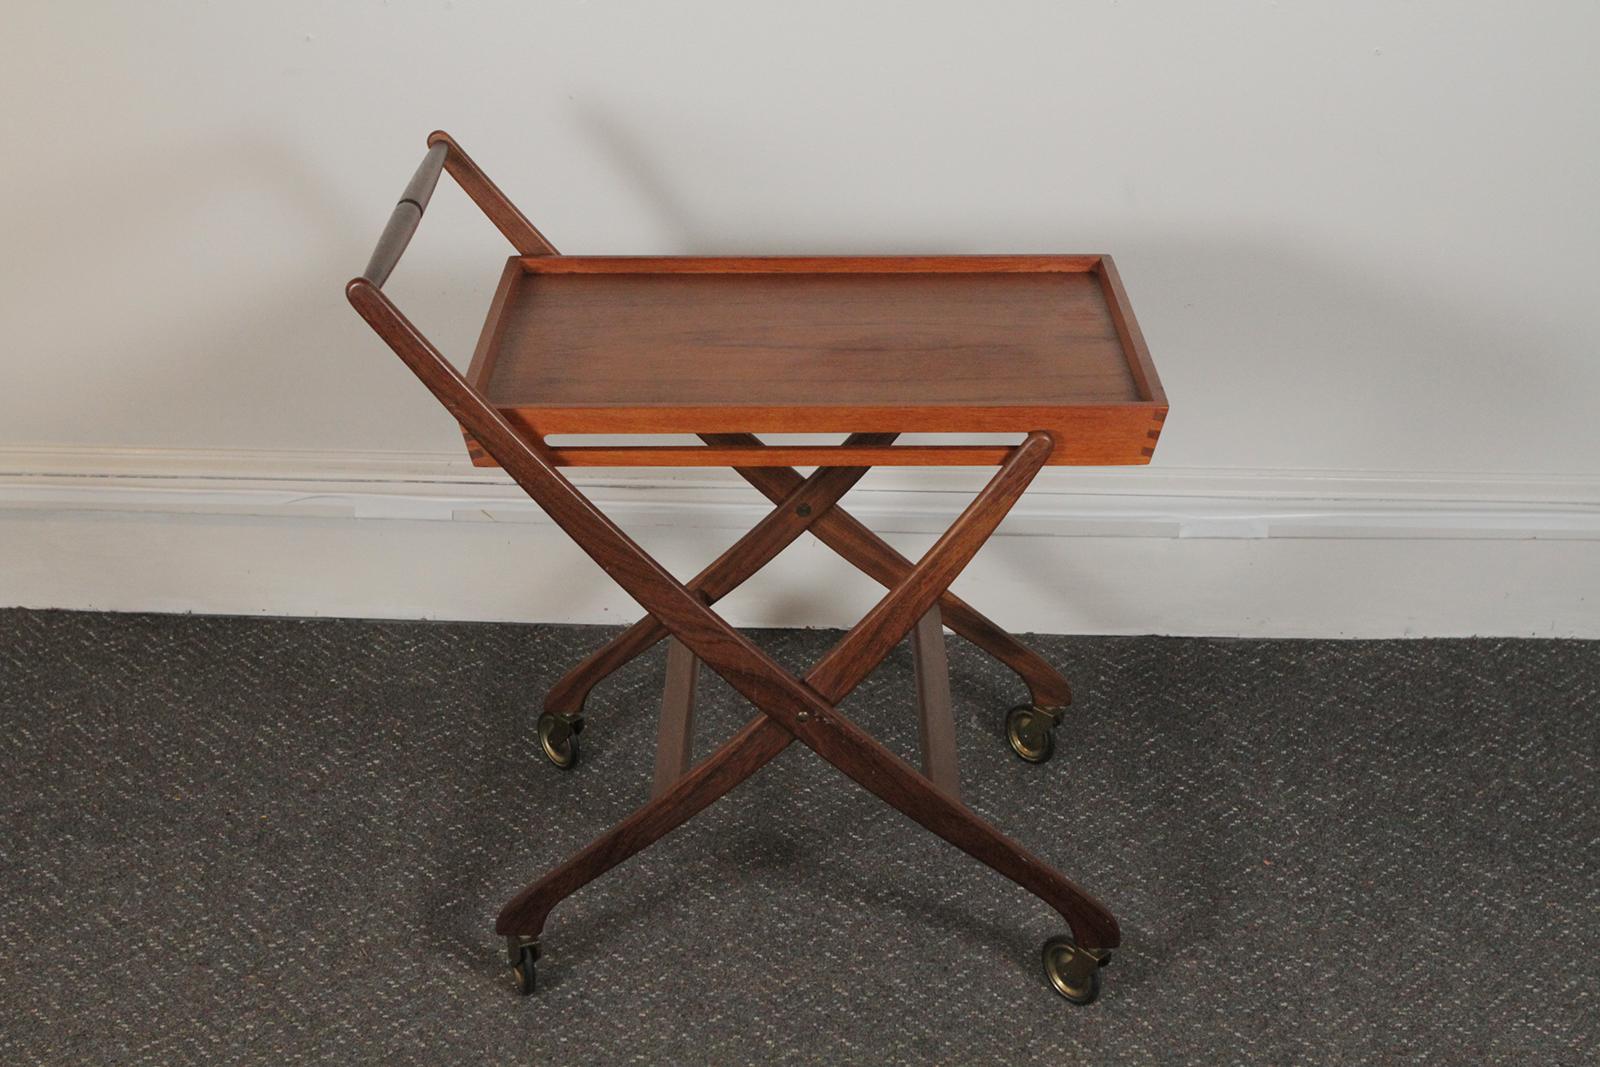 Folding Teak Bar cart, circa 1965, Denmark. Sleek lines and functional design. Marked on the underside with the Denmark Control mark. Dimensions: 28” W x 20” D x 29.5